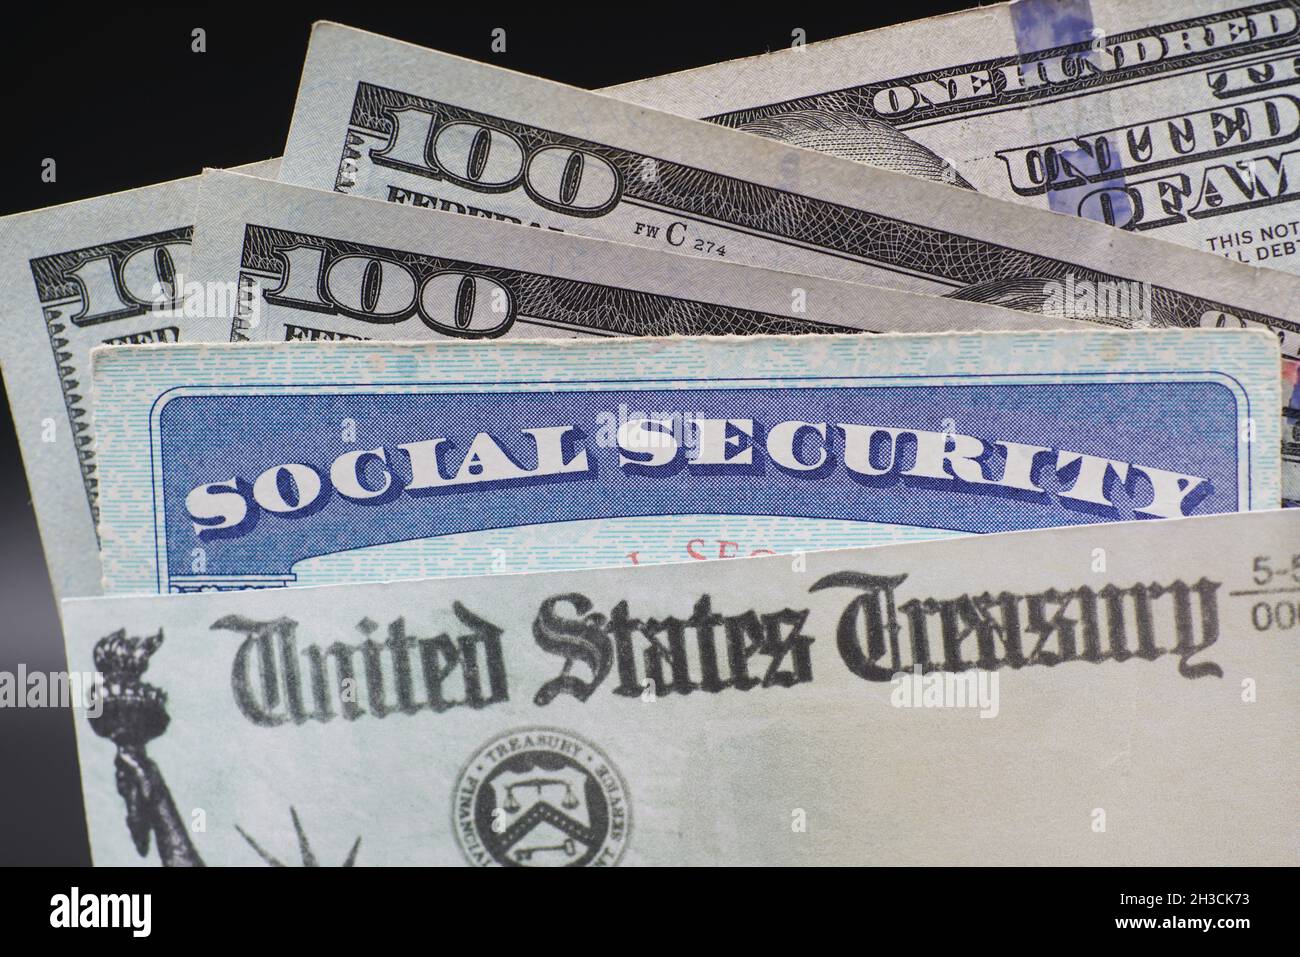 Lale Elsinore, CA - October 26, 2021: United States Treasury check with US currency and SSN Card. Stock Photo